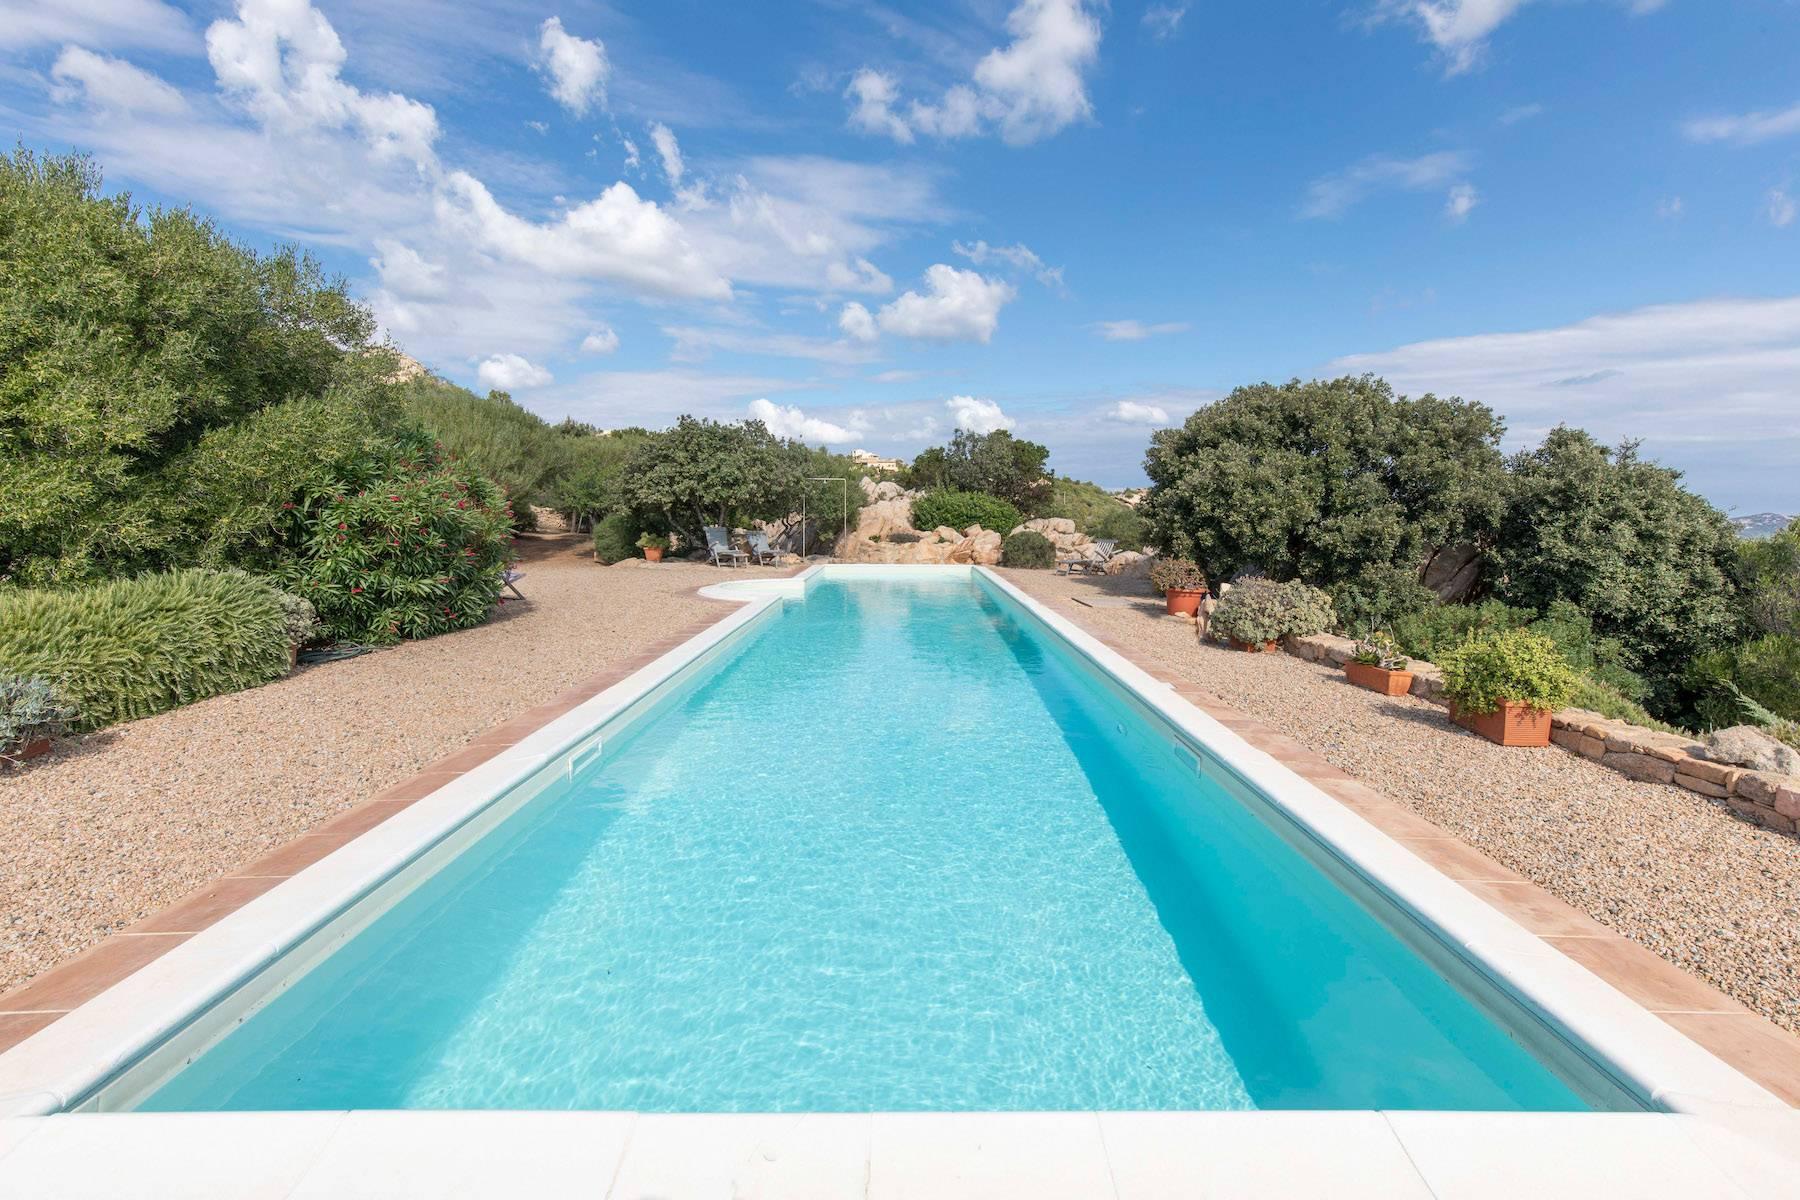 Splendid estate, surrounded by Mediterranean vegetation, overlooking the Gulf of Cannigione - 6